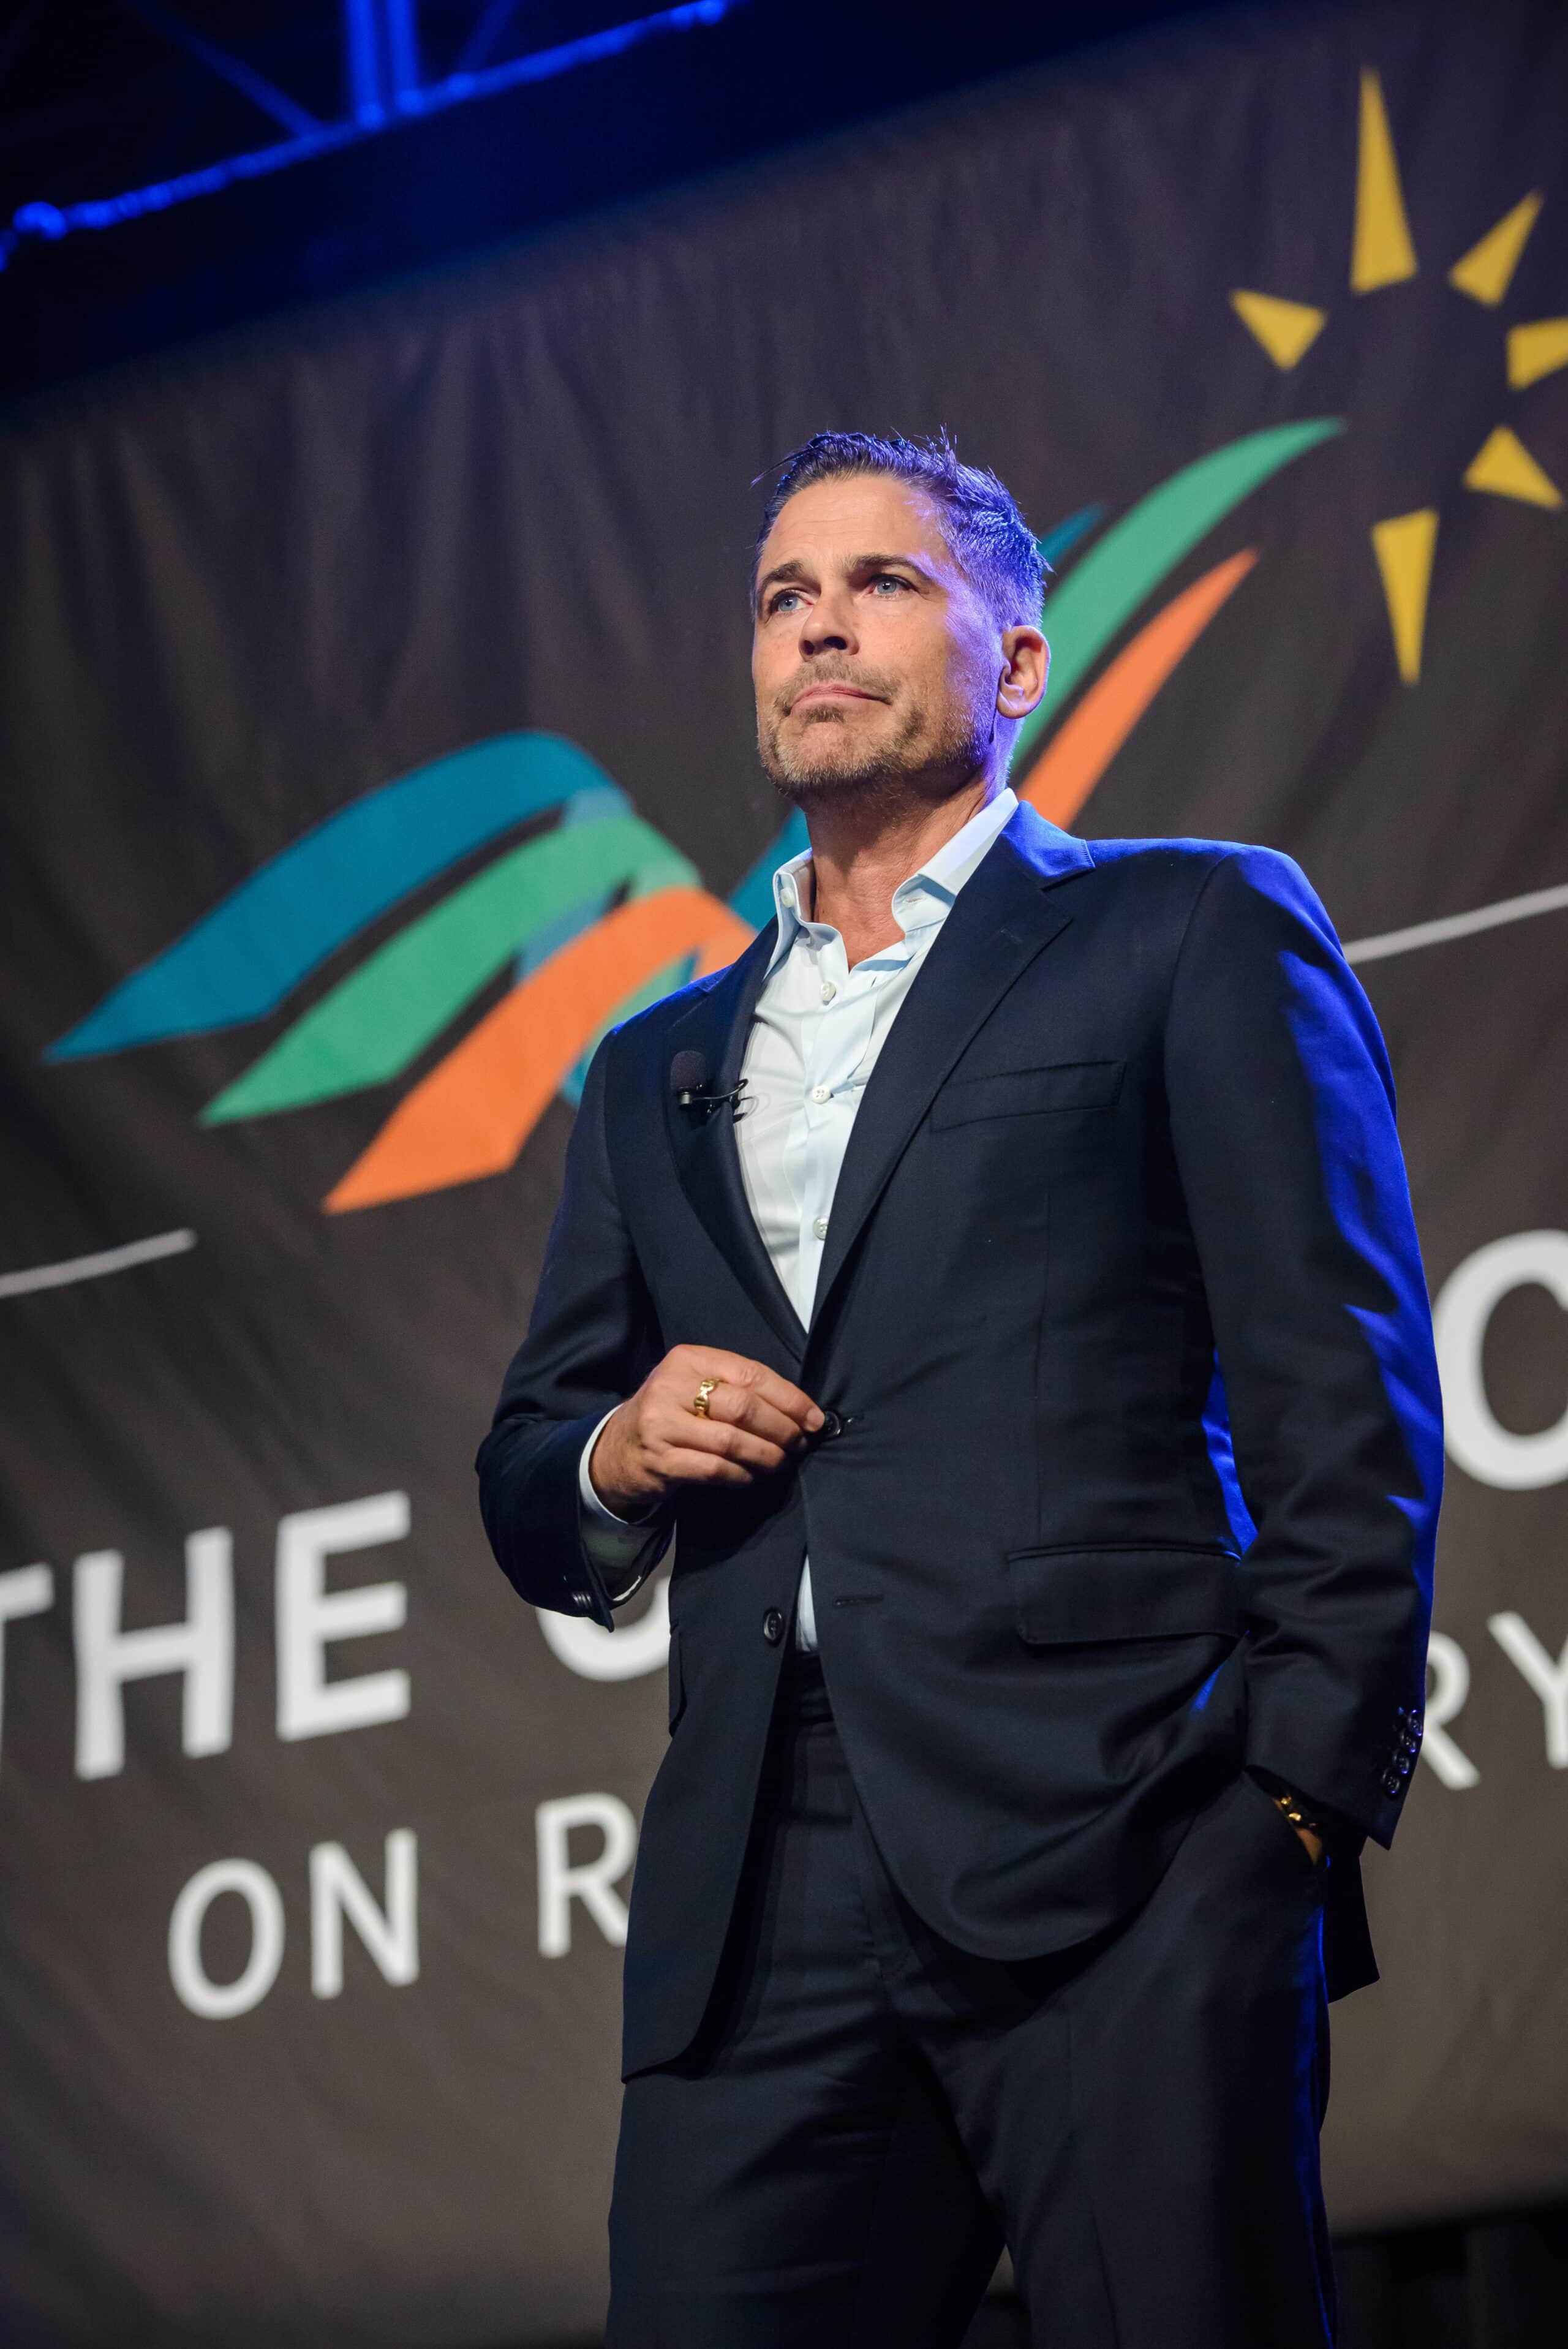 Rob Lowe Speaks at The Council on Recovery's Fall Luncheon